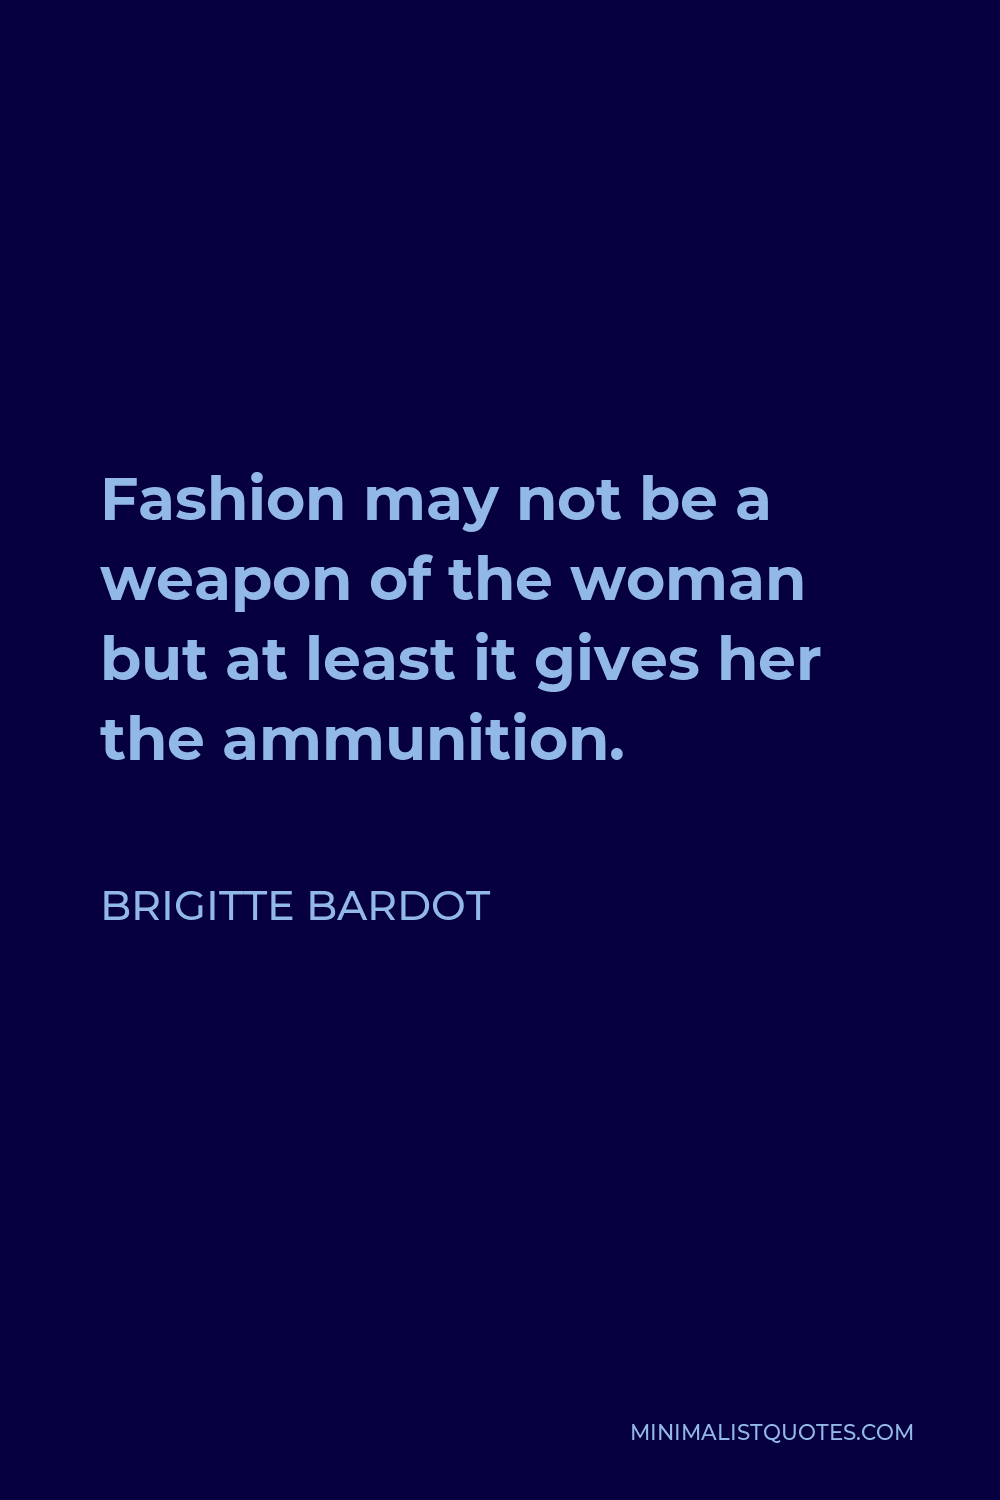 Brigitte Bardot Quote - Fashion may not be a weapon of the woman but at least it gives her the ammunition.